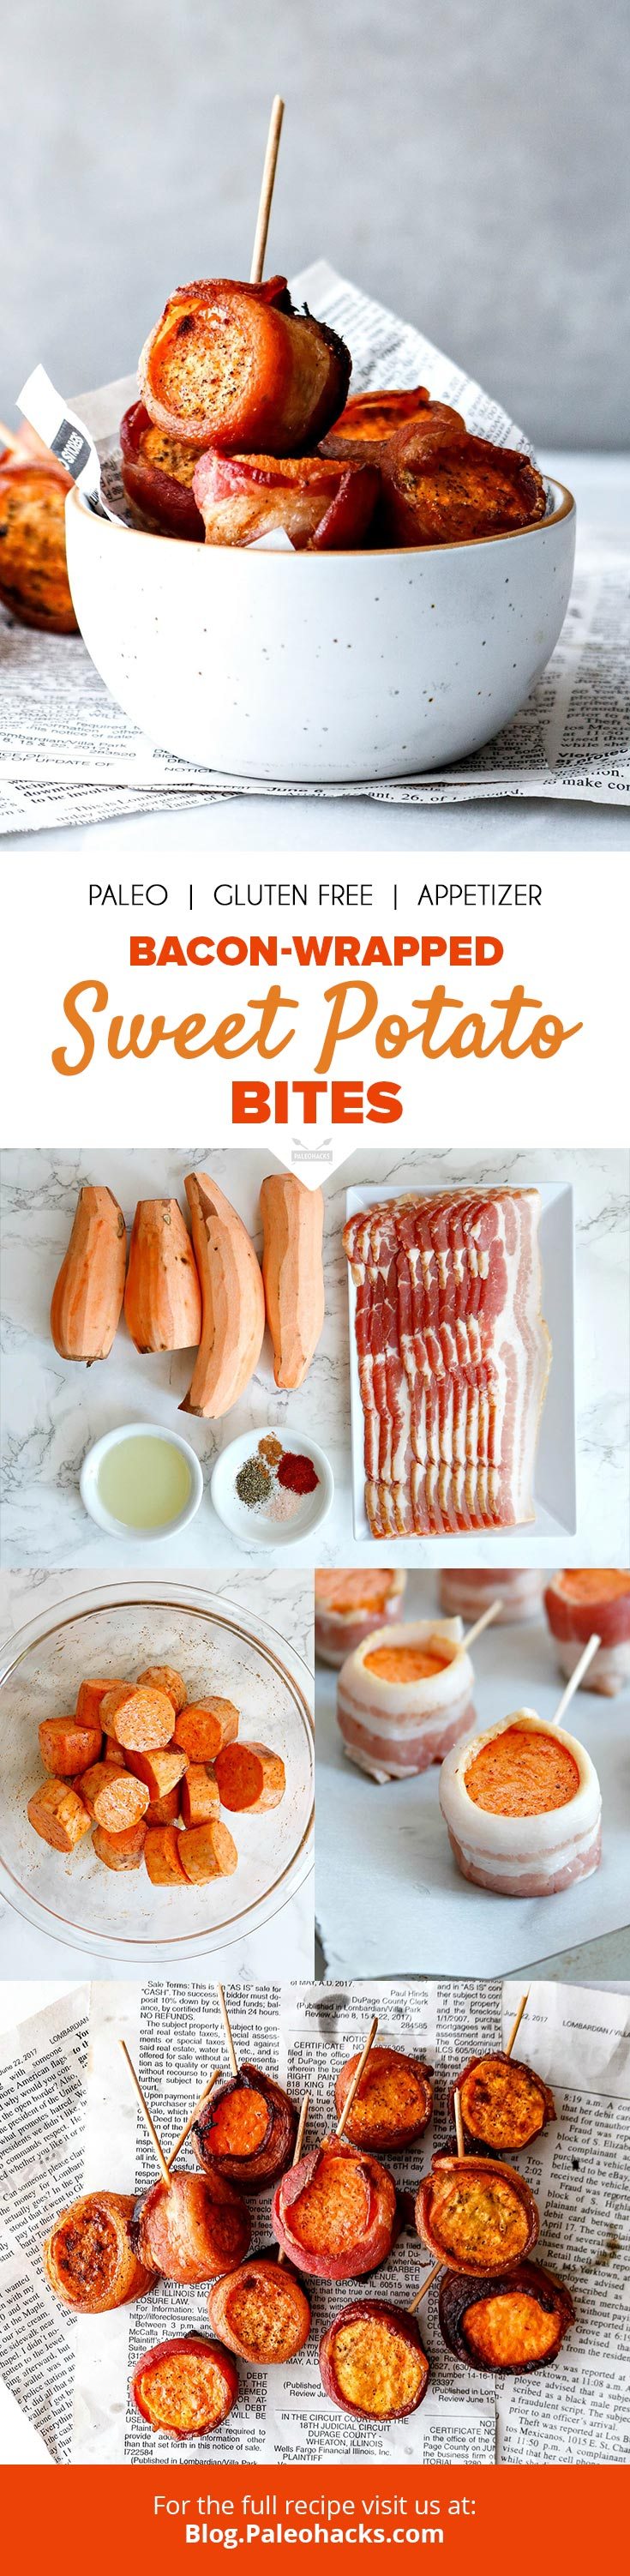 Gear up for game day with these two-ingredient Sweet Potato Bacon Bites you can serve up as scrumptious appetizers.